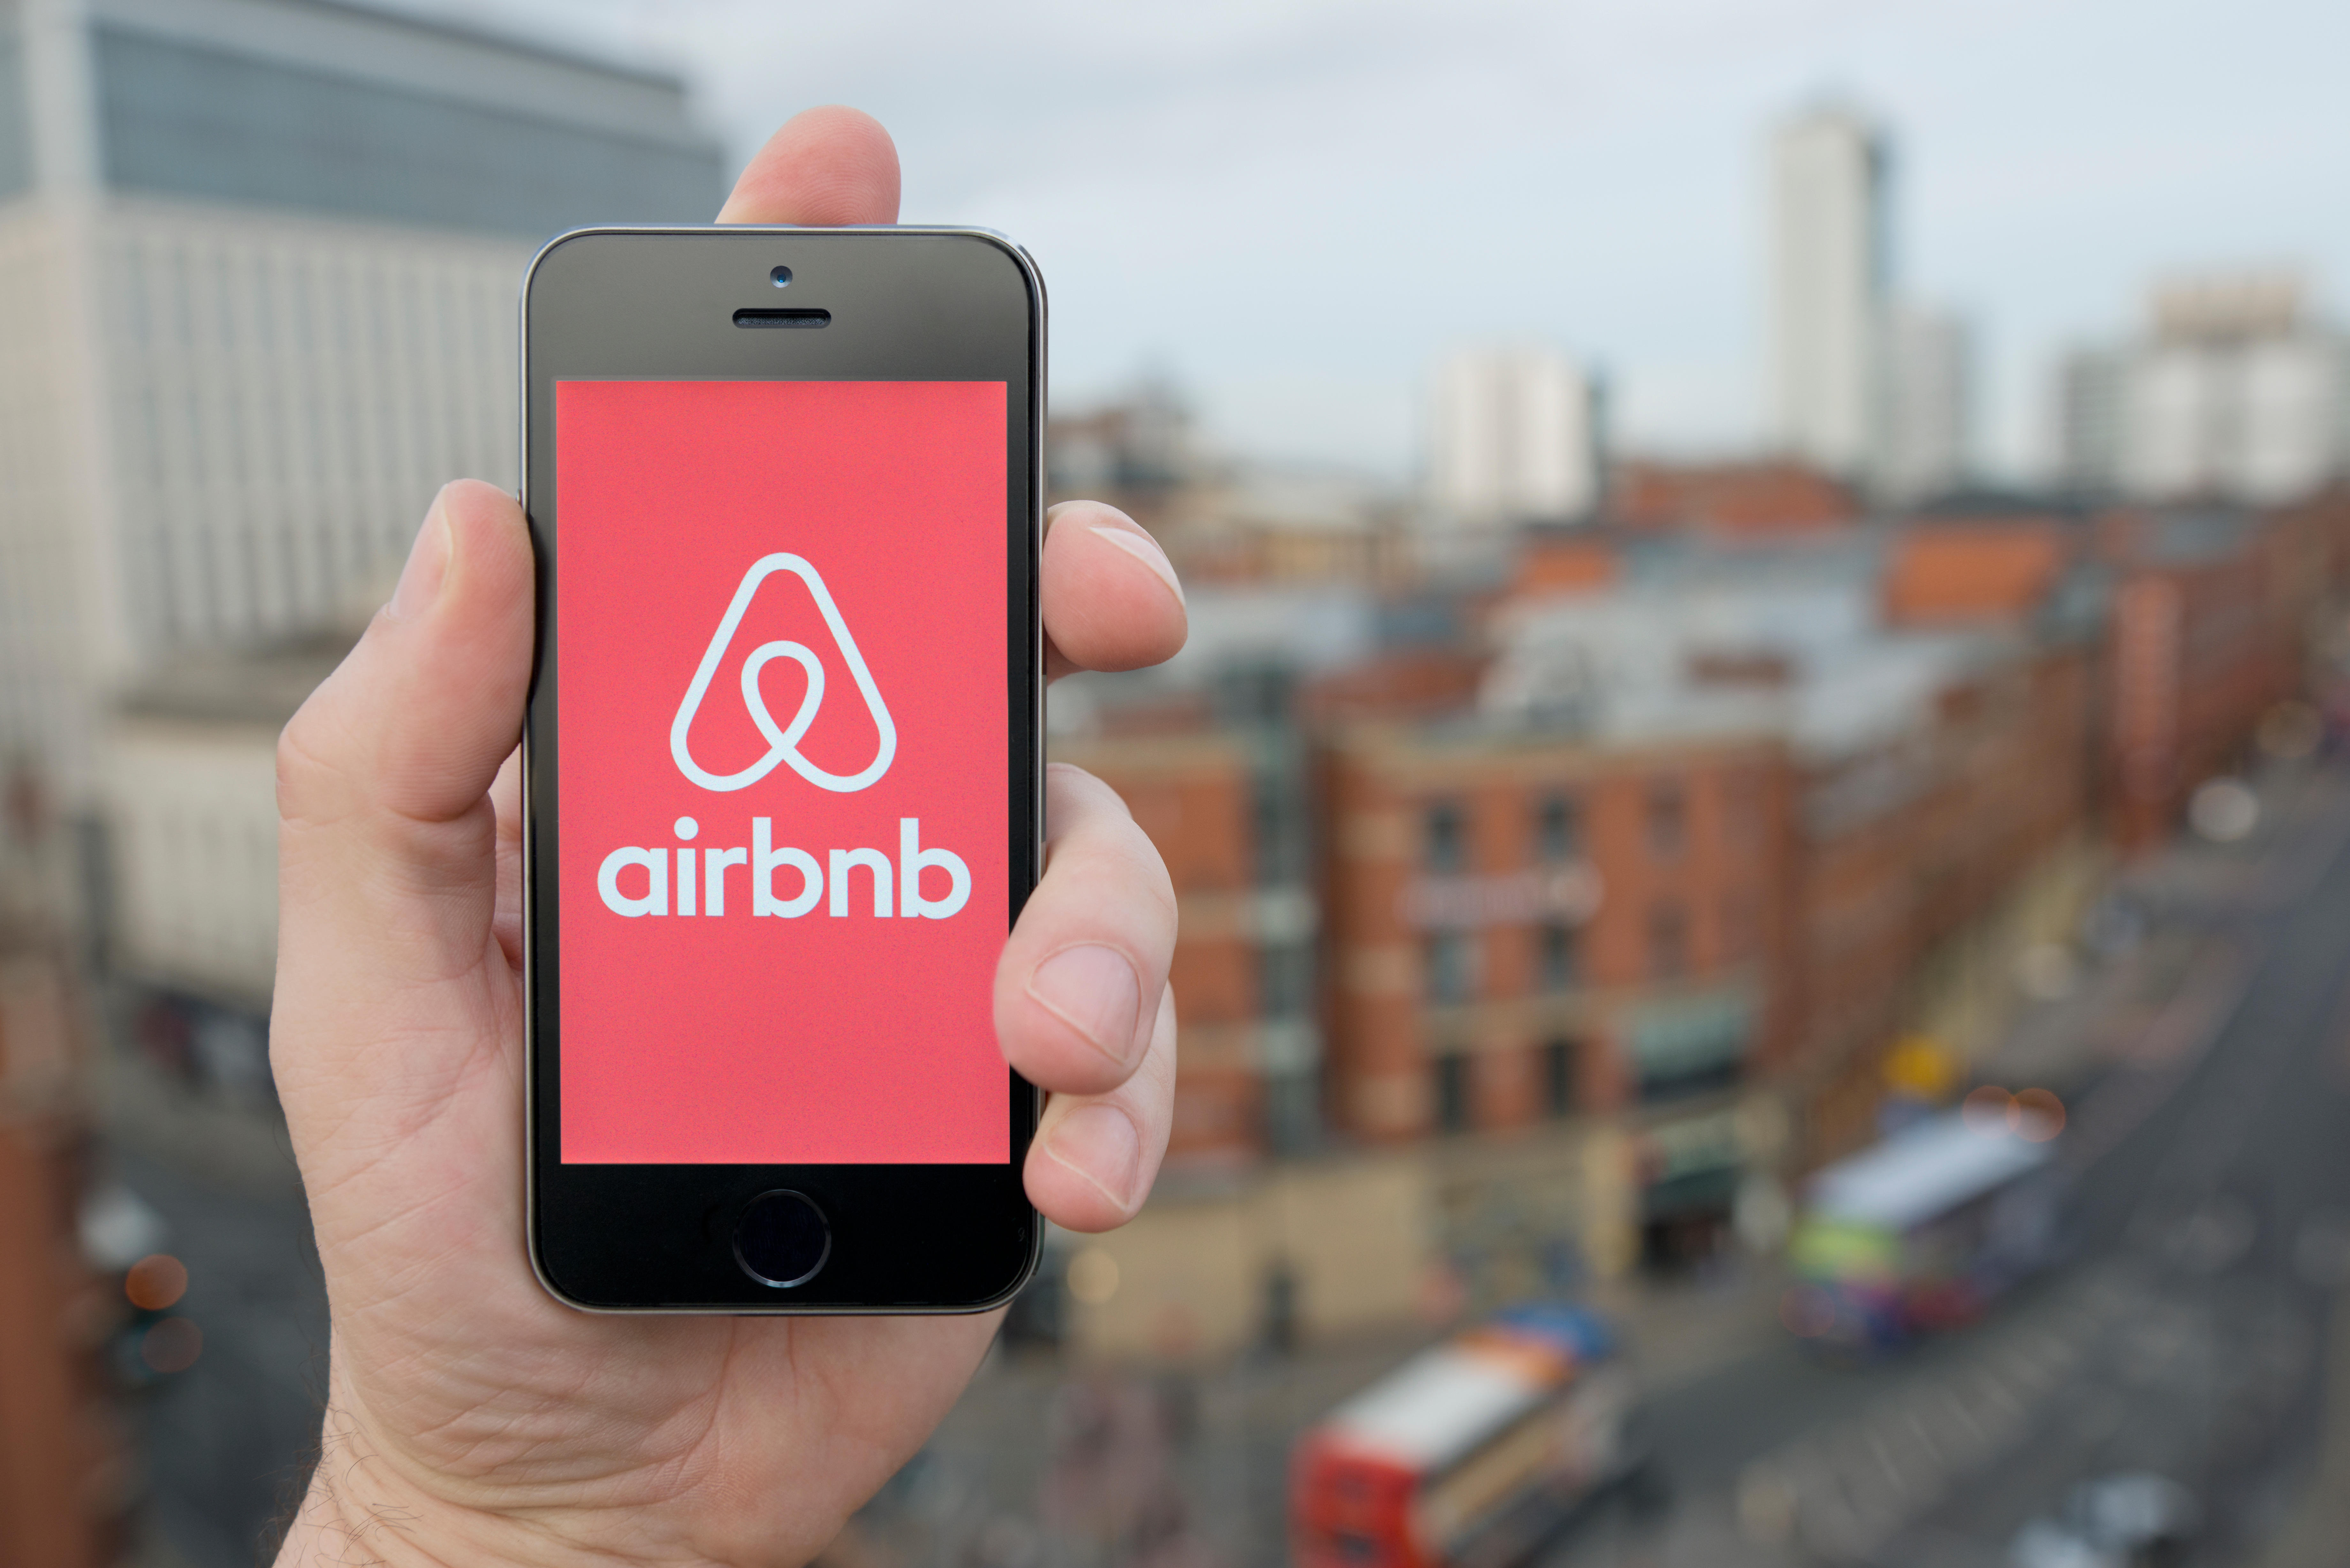 Here are four genius tricks to save cash on your Airbnb stay - in the UK or abroad